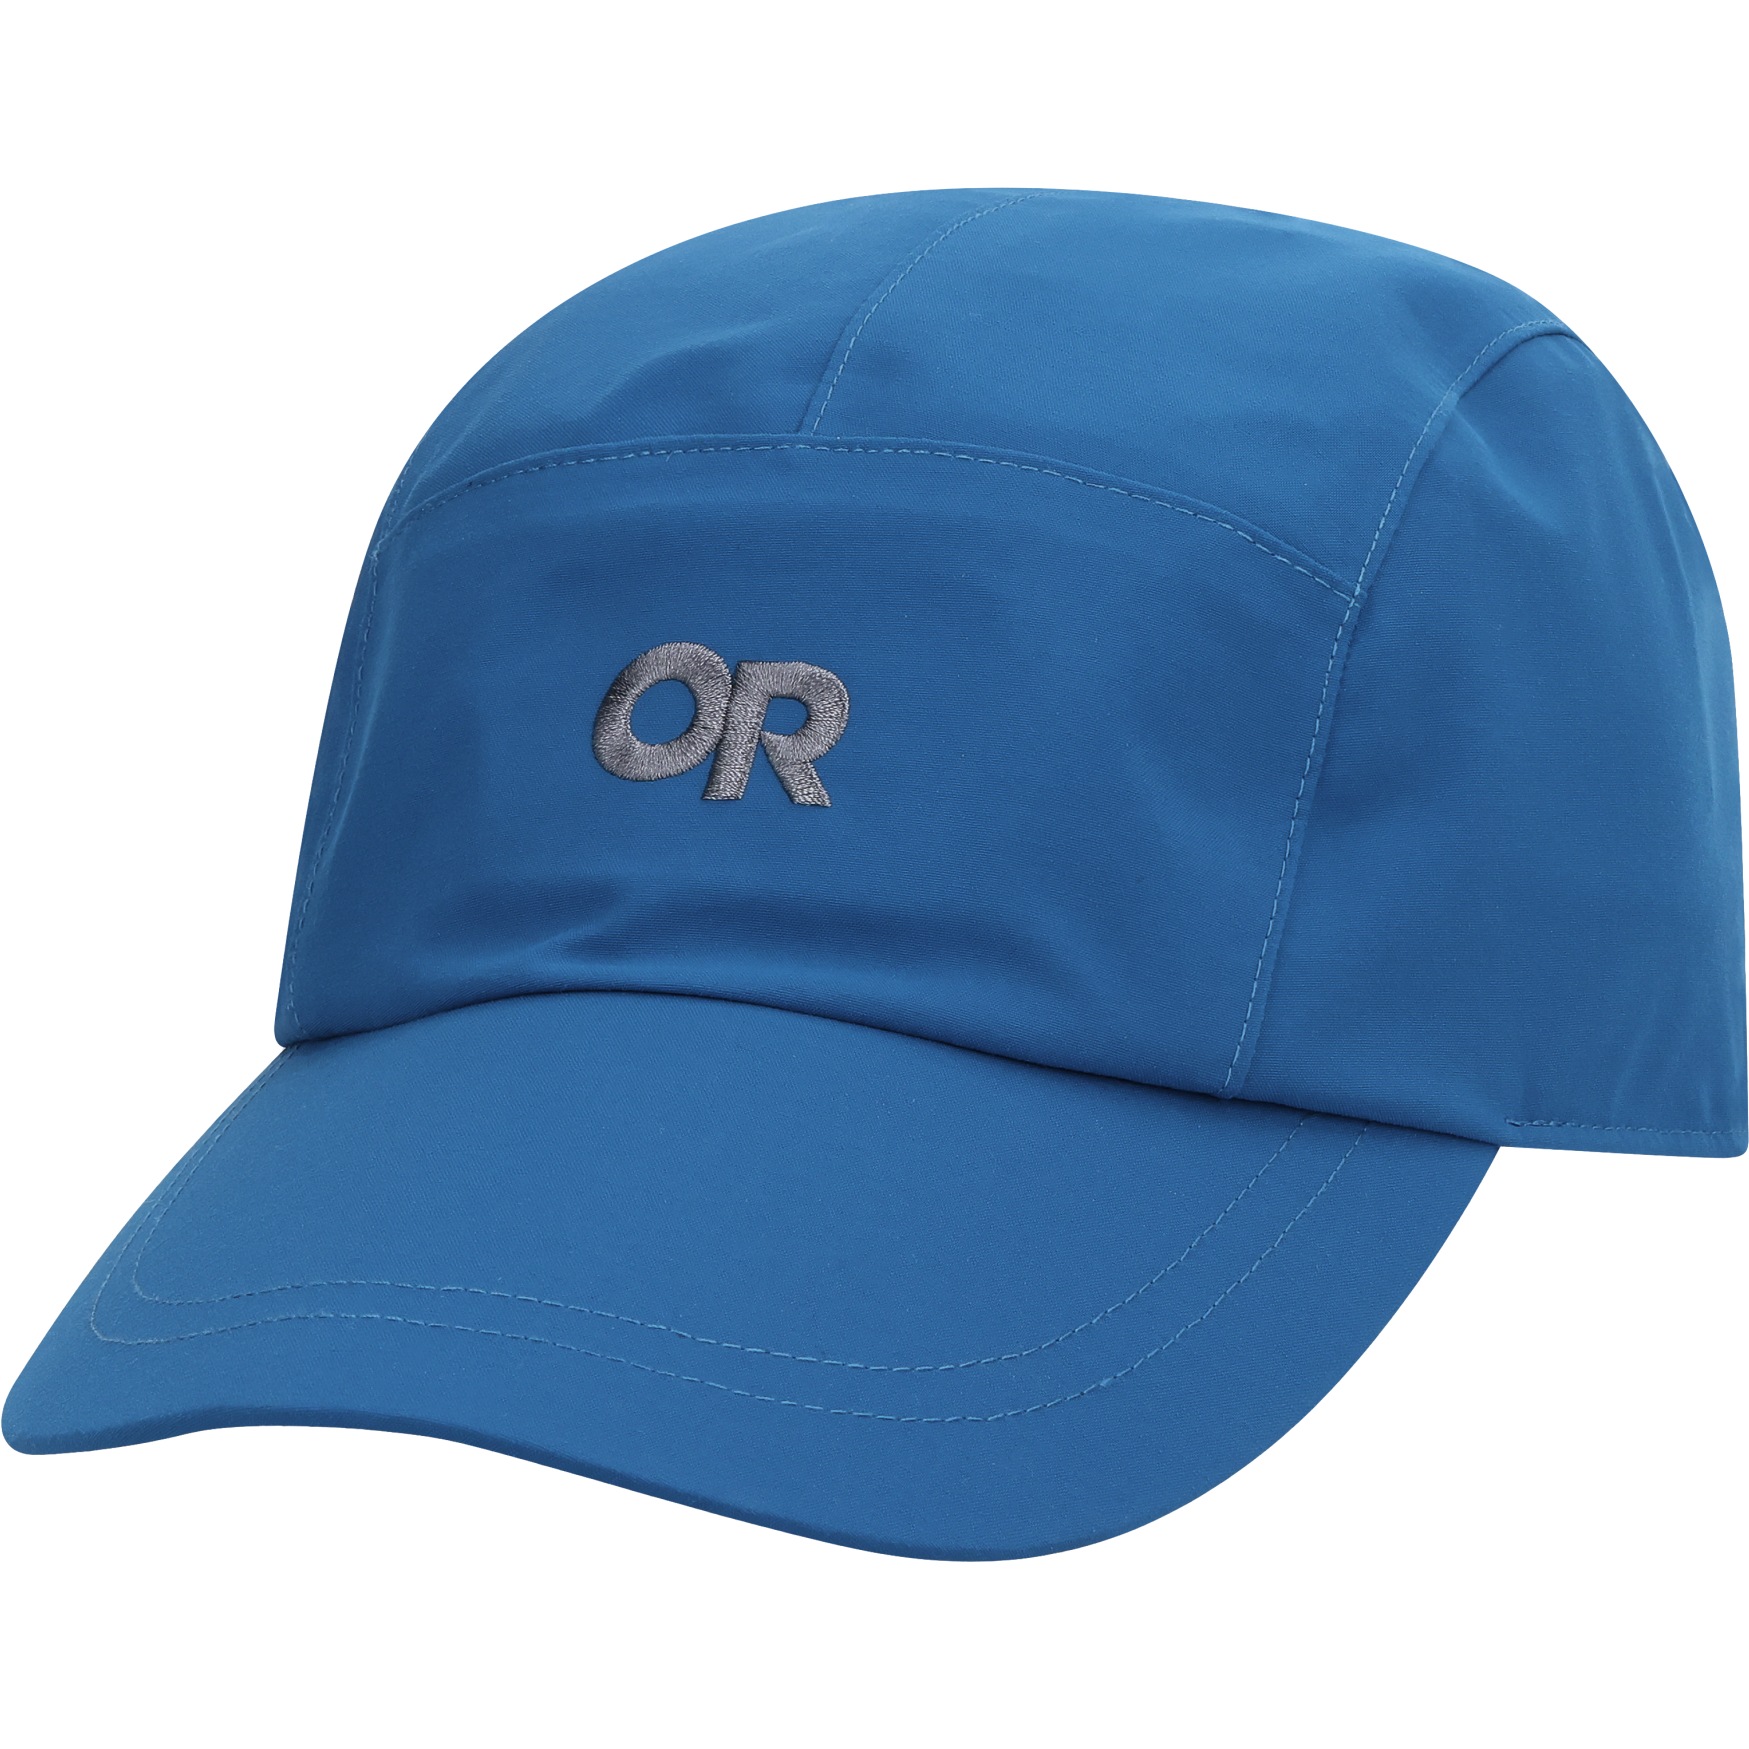 Picture of Outdoor Research Seattle Rain Cap - classic blue